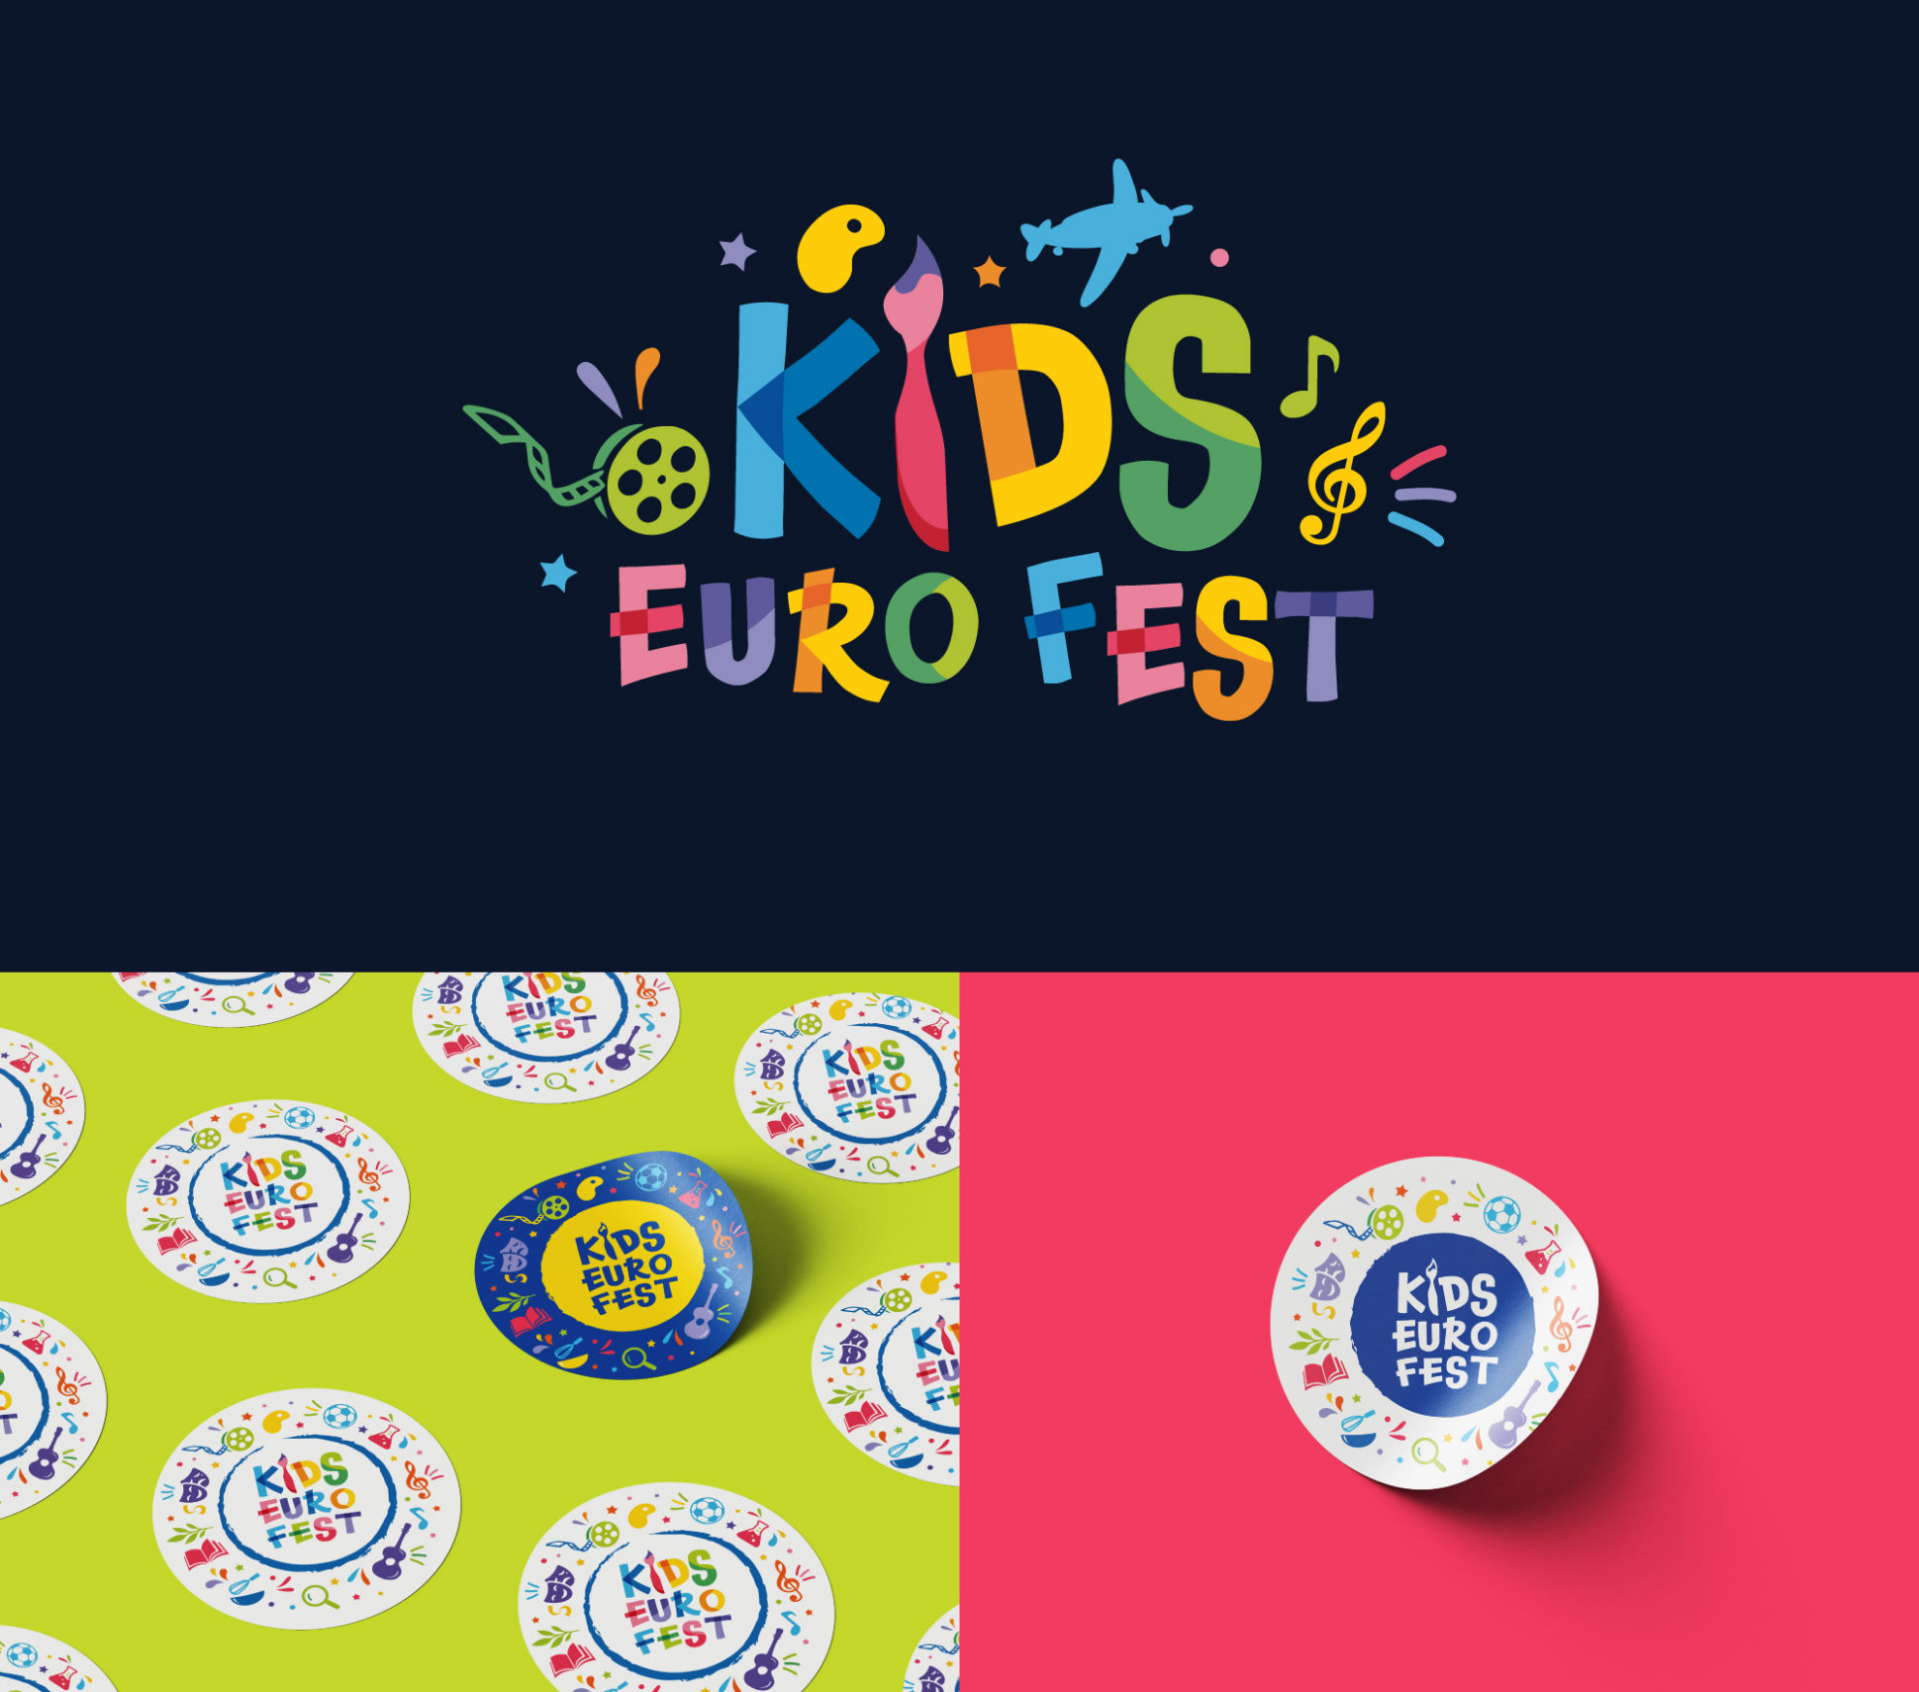 A vibrant promotional graphic for "DEU Kids Euro Fest" featuring a colorful logo with playful elements like a paintbrush, musical note, and soccer ball on a dark blue background, and branded circular stickers